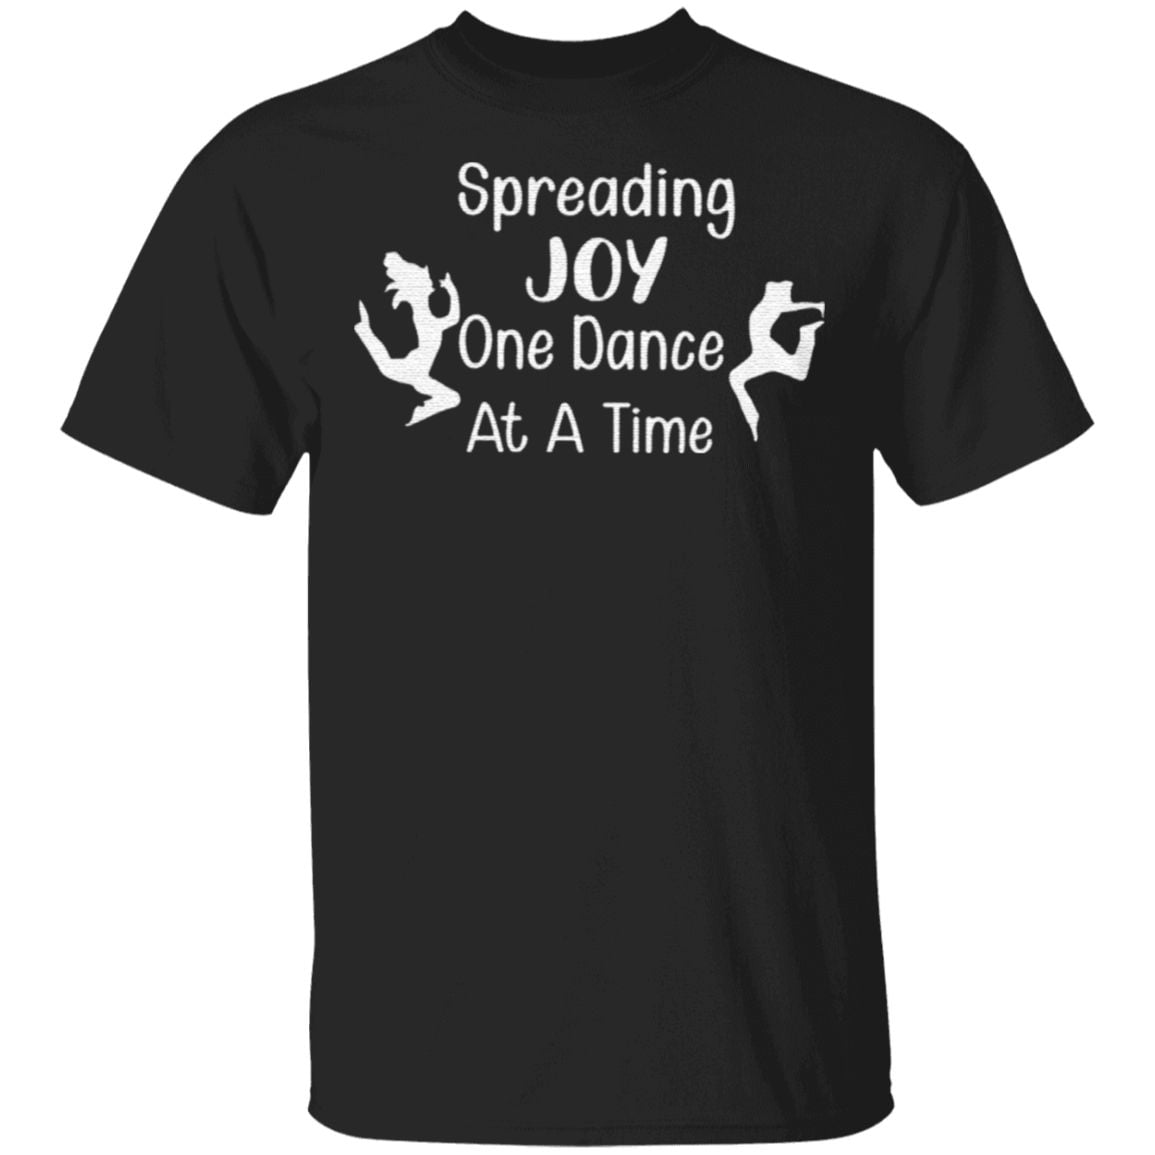 Spread Joy One Dance At A Time T Shirt